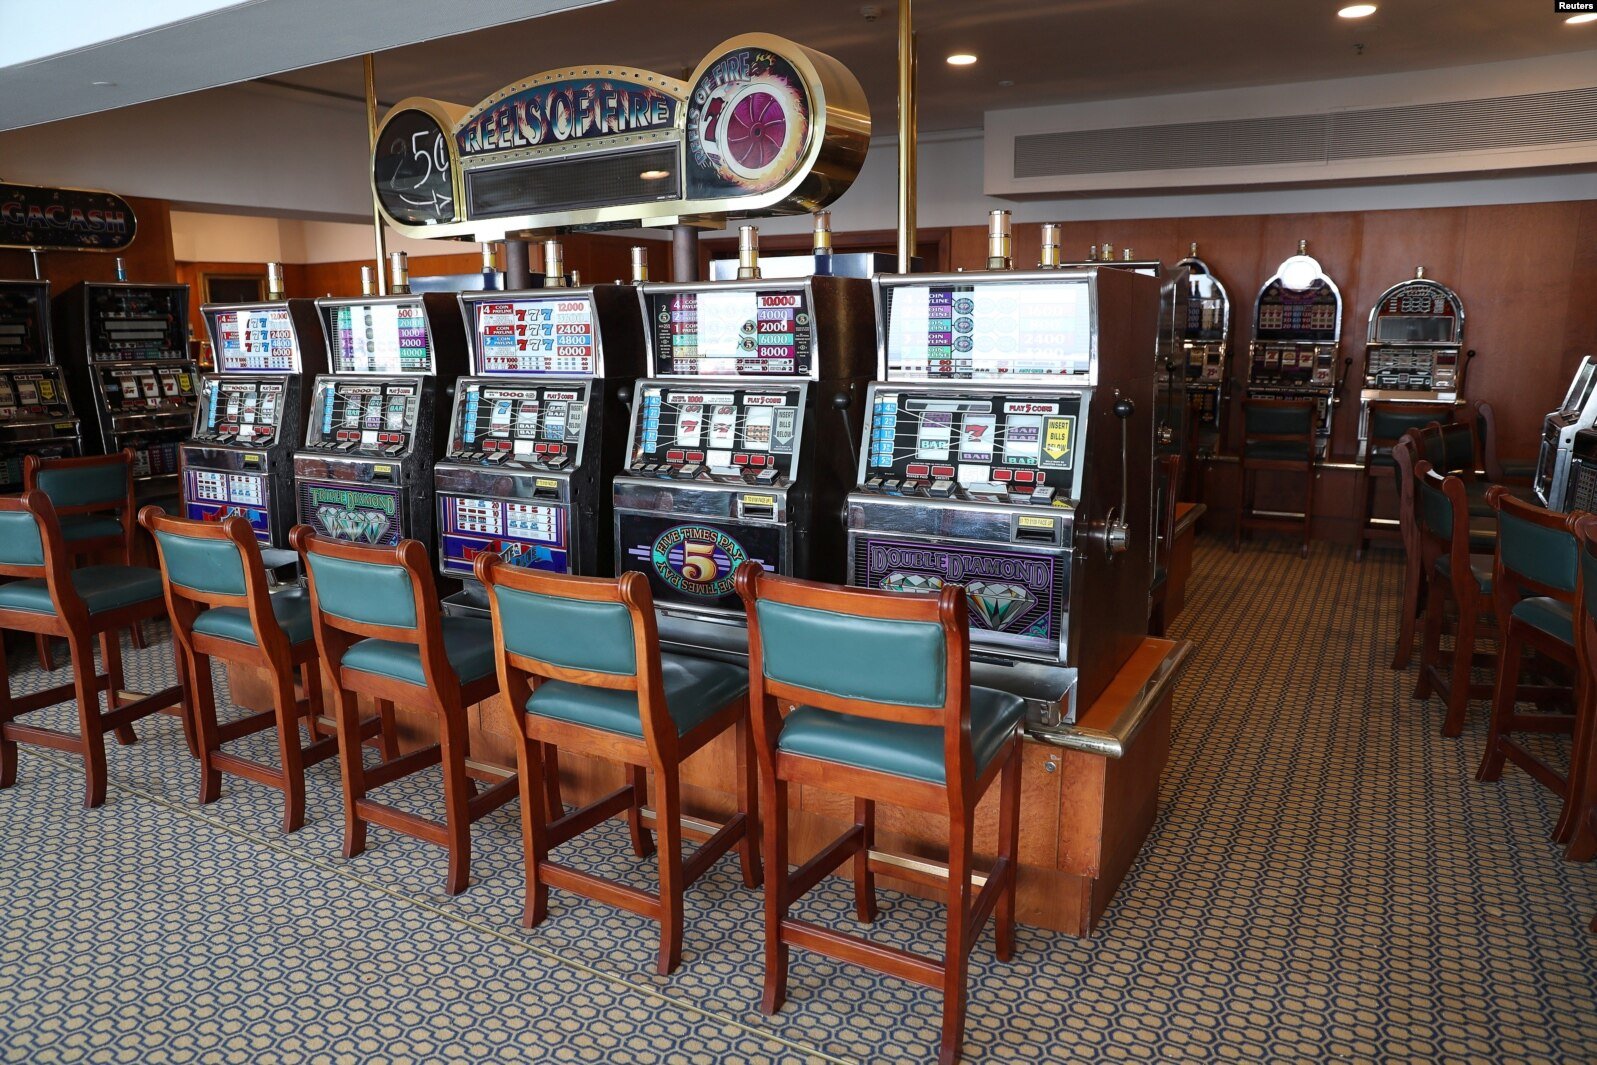 Slot machines in the Queen Elizabeth 2 cruise ship turned floating hotel